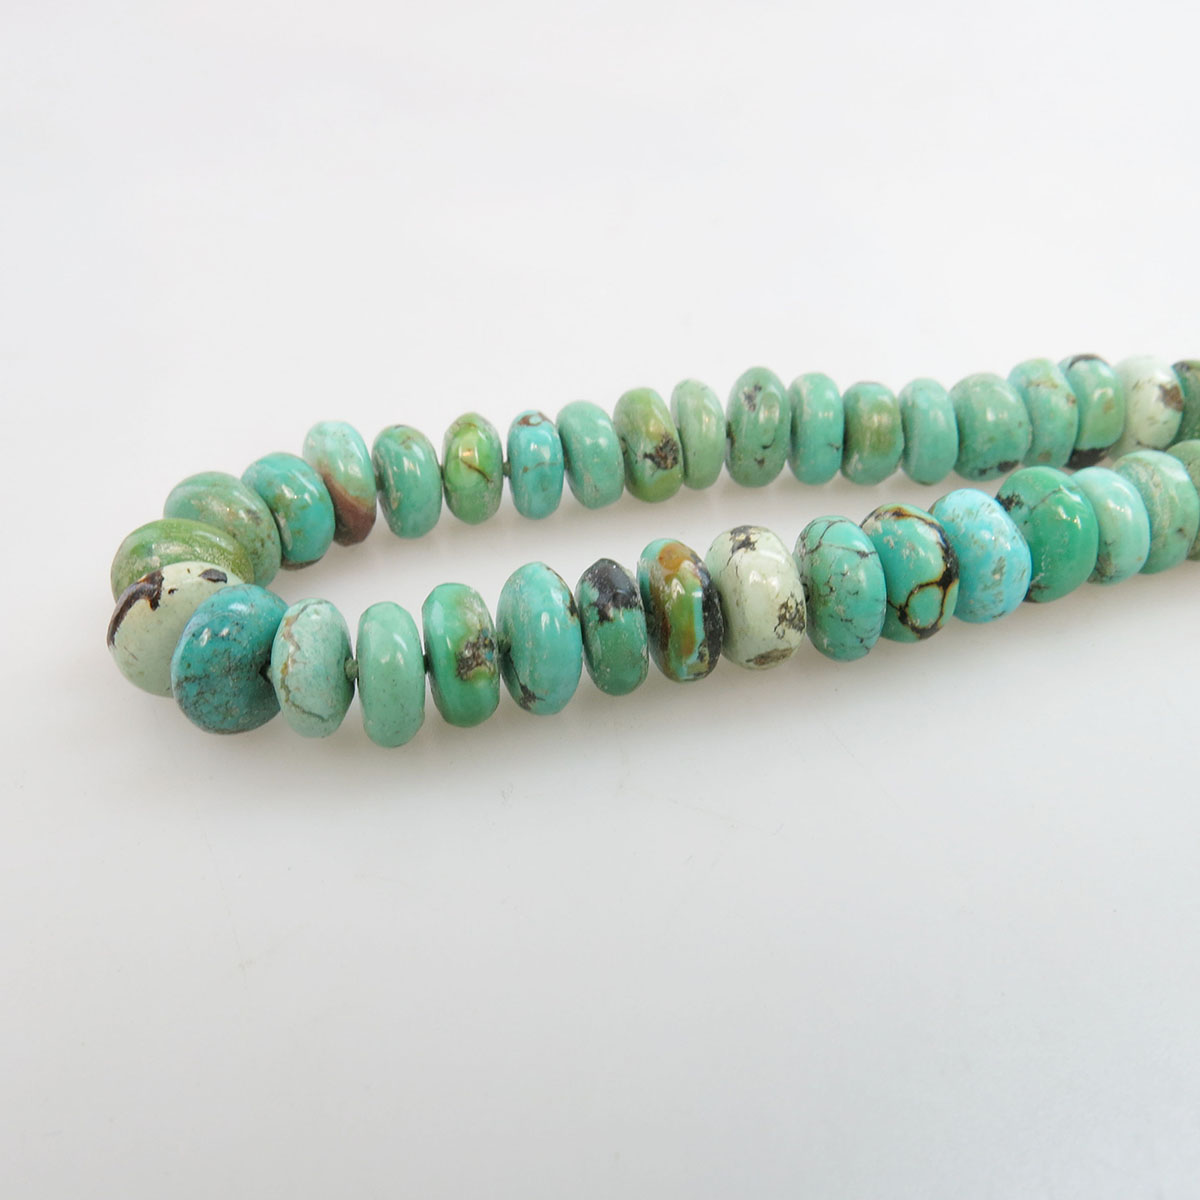 Single Endless Strand Of Turquoise Beads